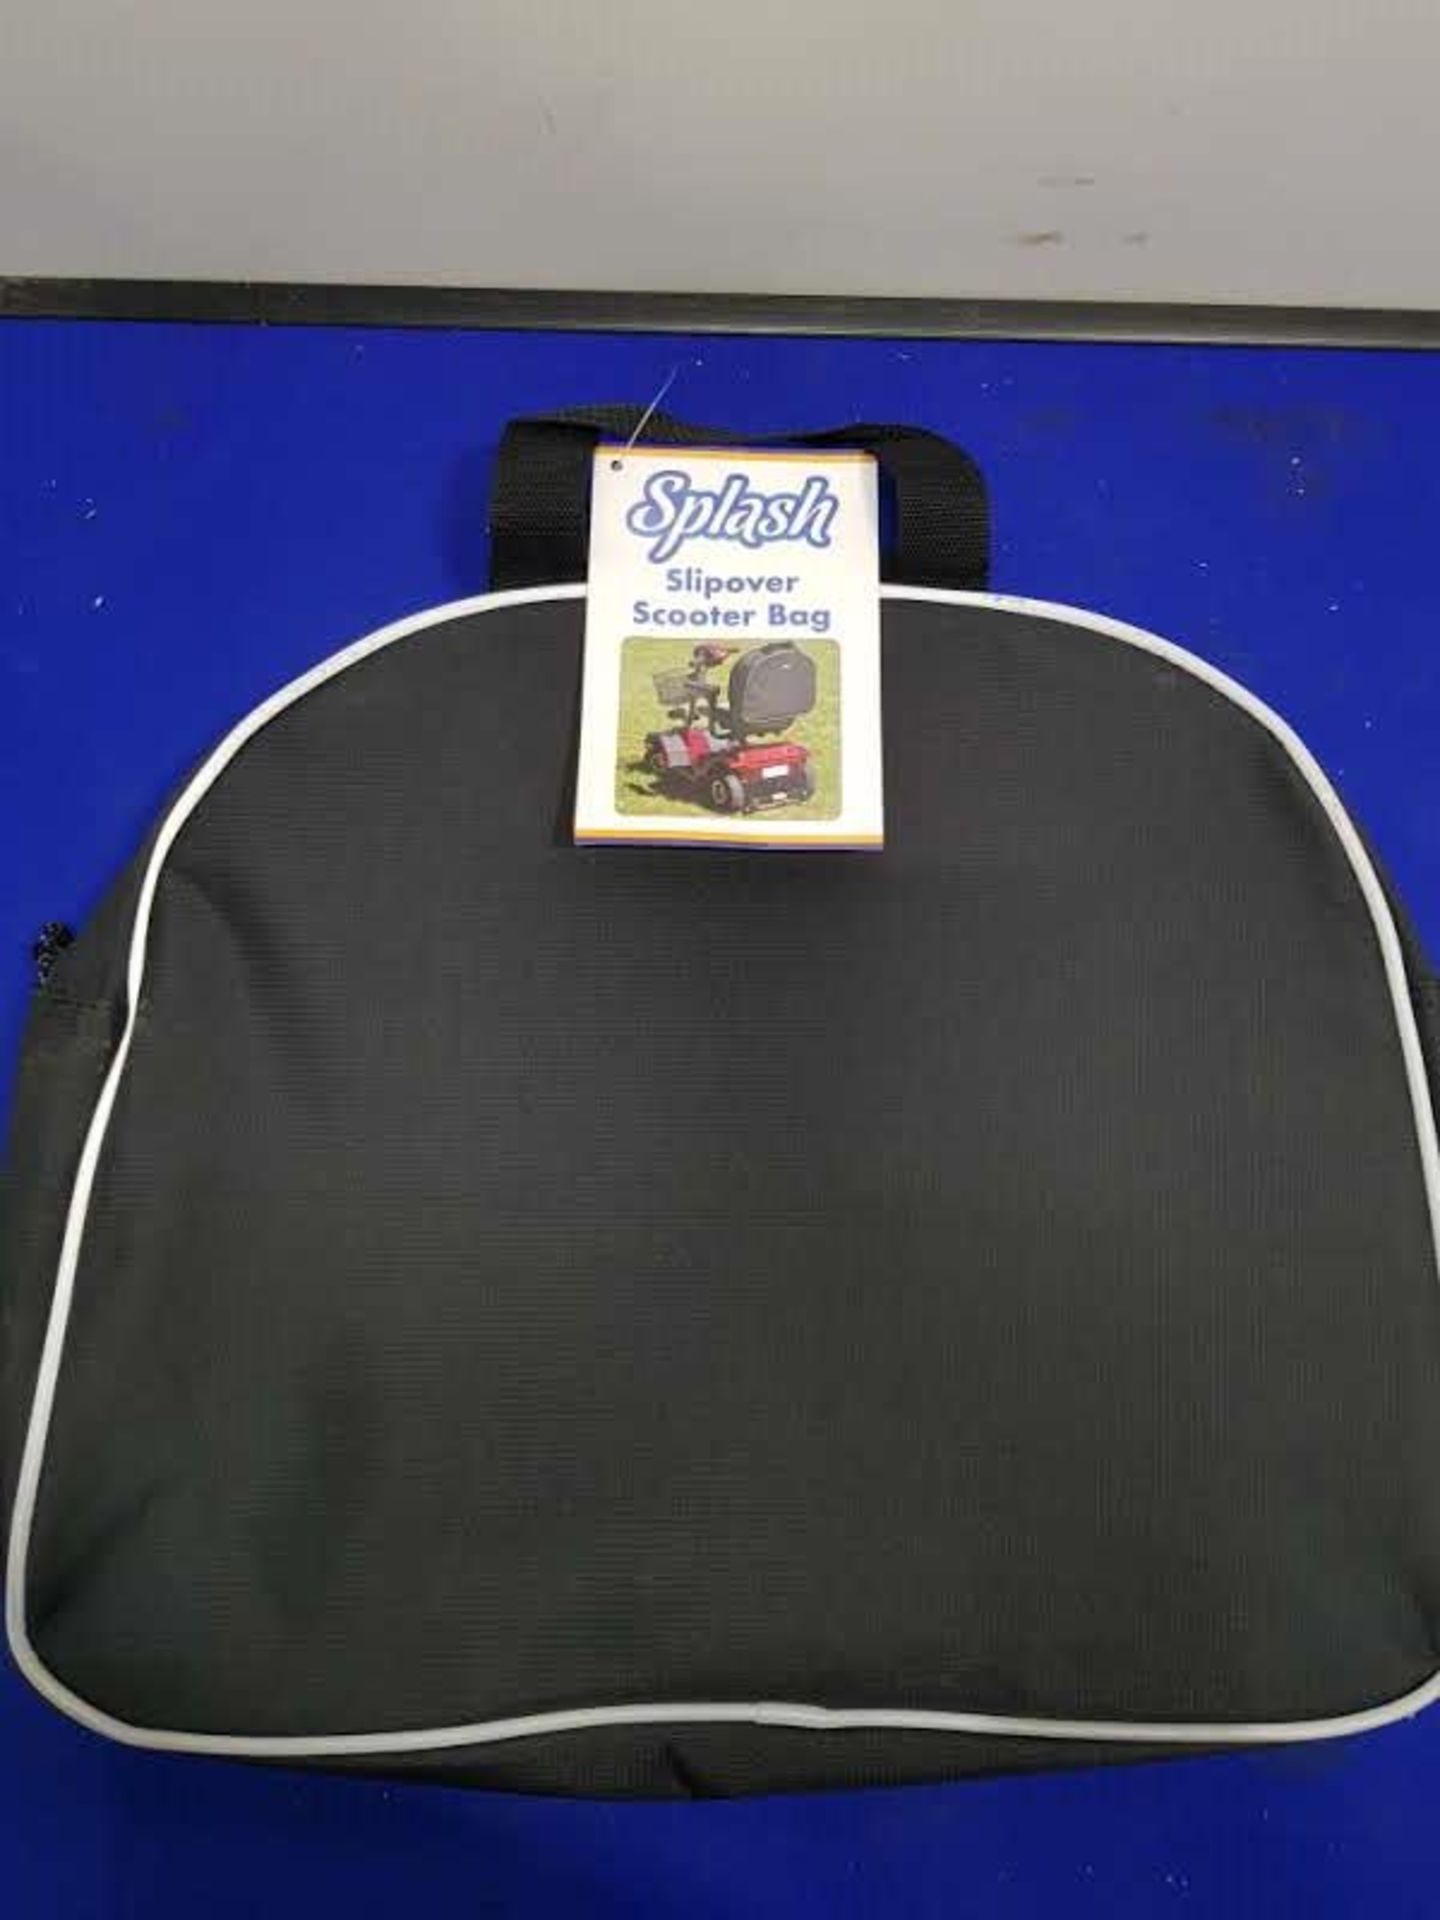 Wheelchair Cover Bag - Image 2 of 2